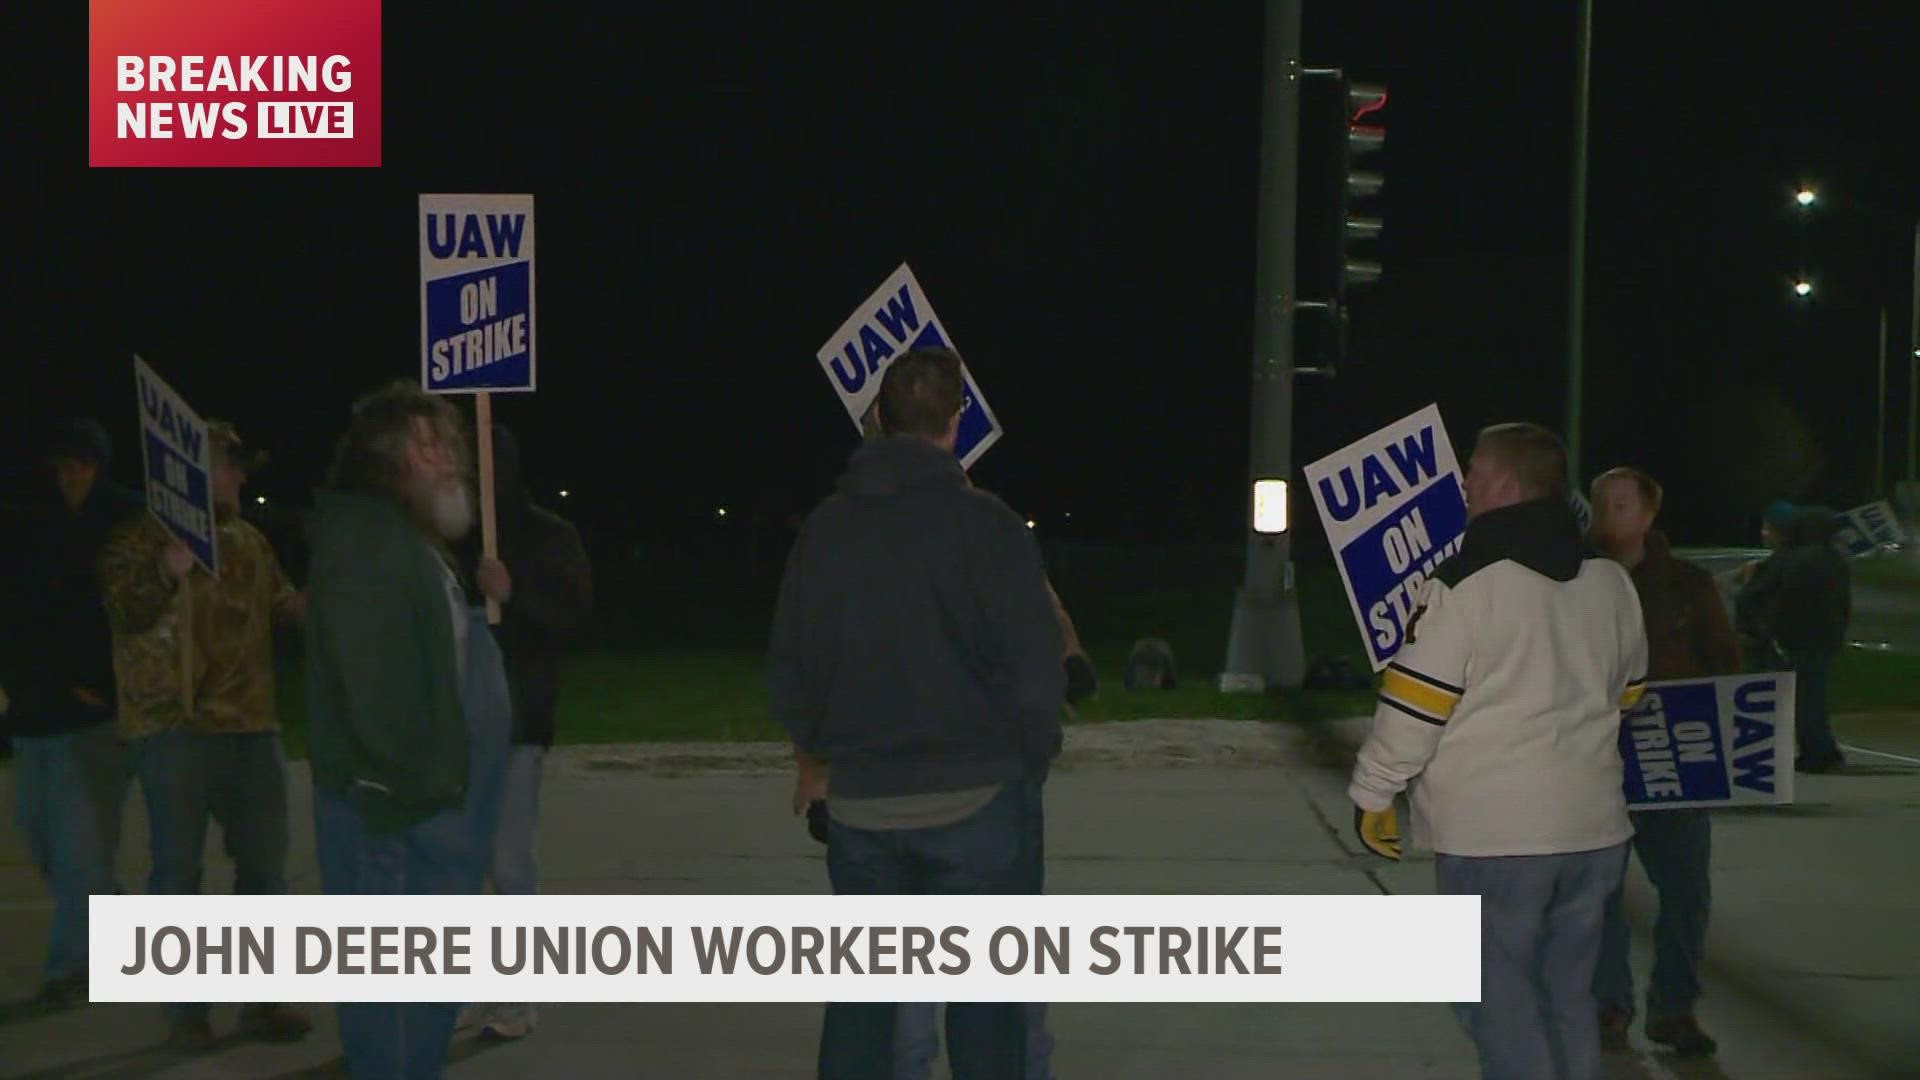 More than 10,000 John Deere workers are striking after United Auto Workers members did not come to an agreement on the proposed contract Wednesday night.